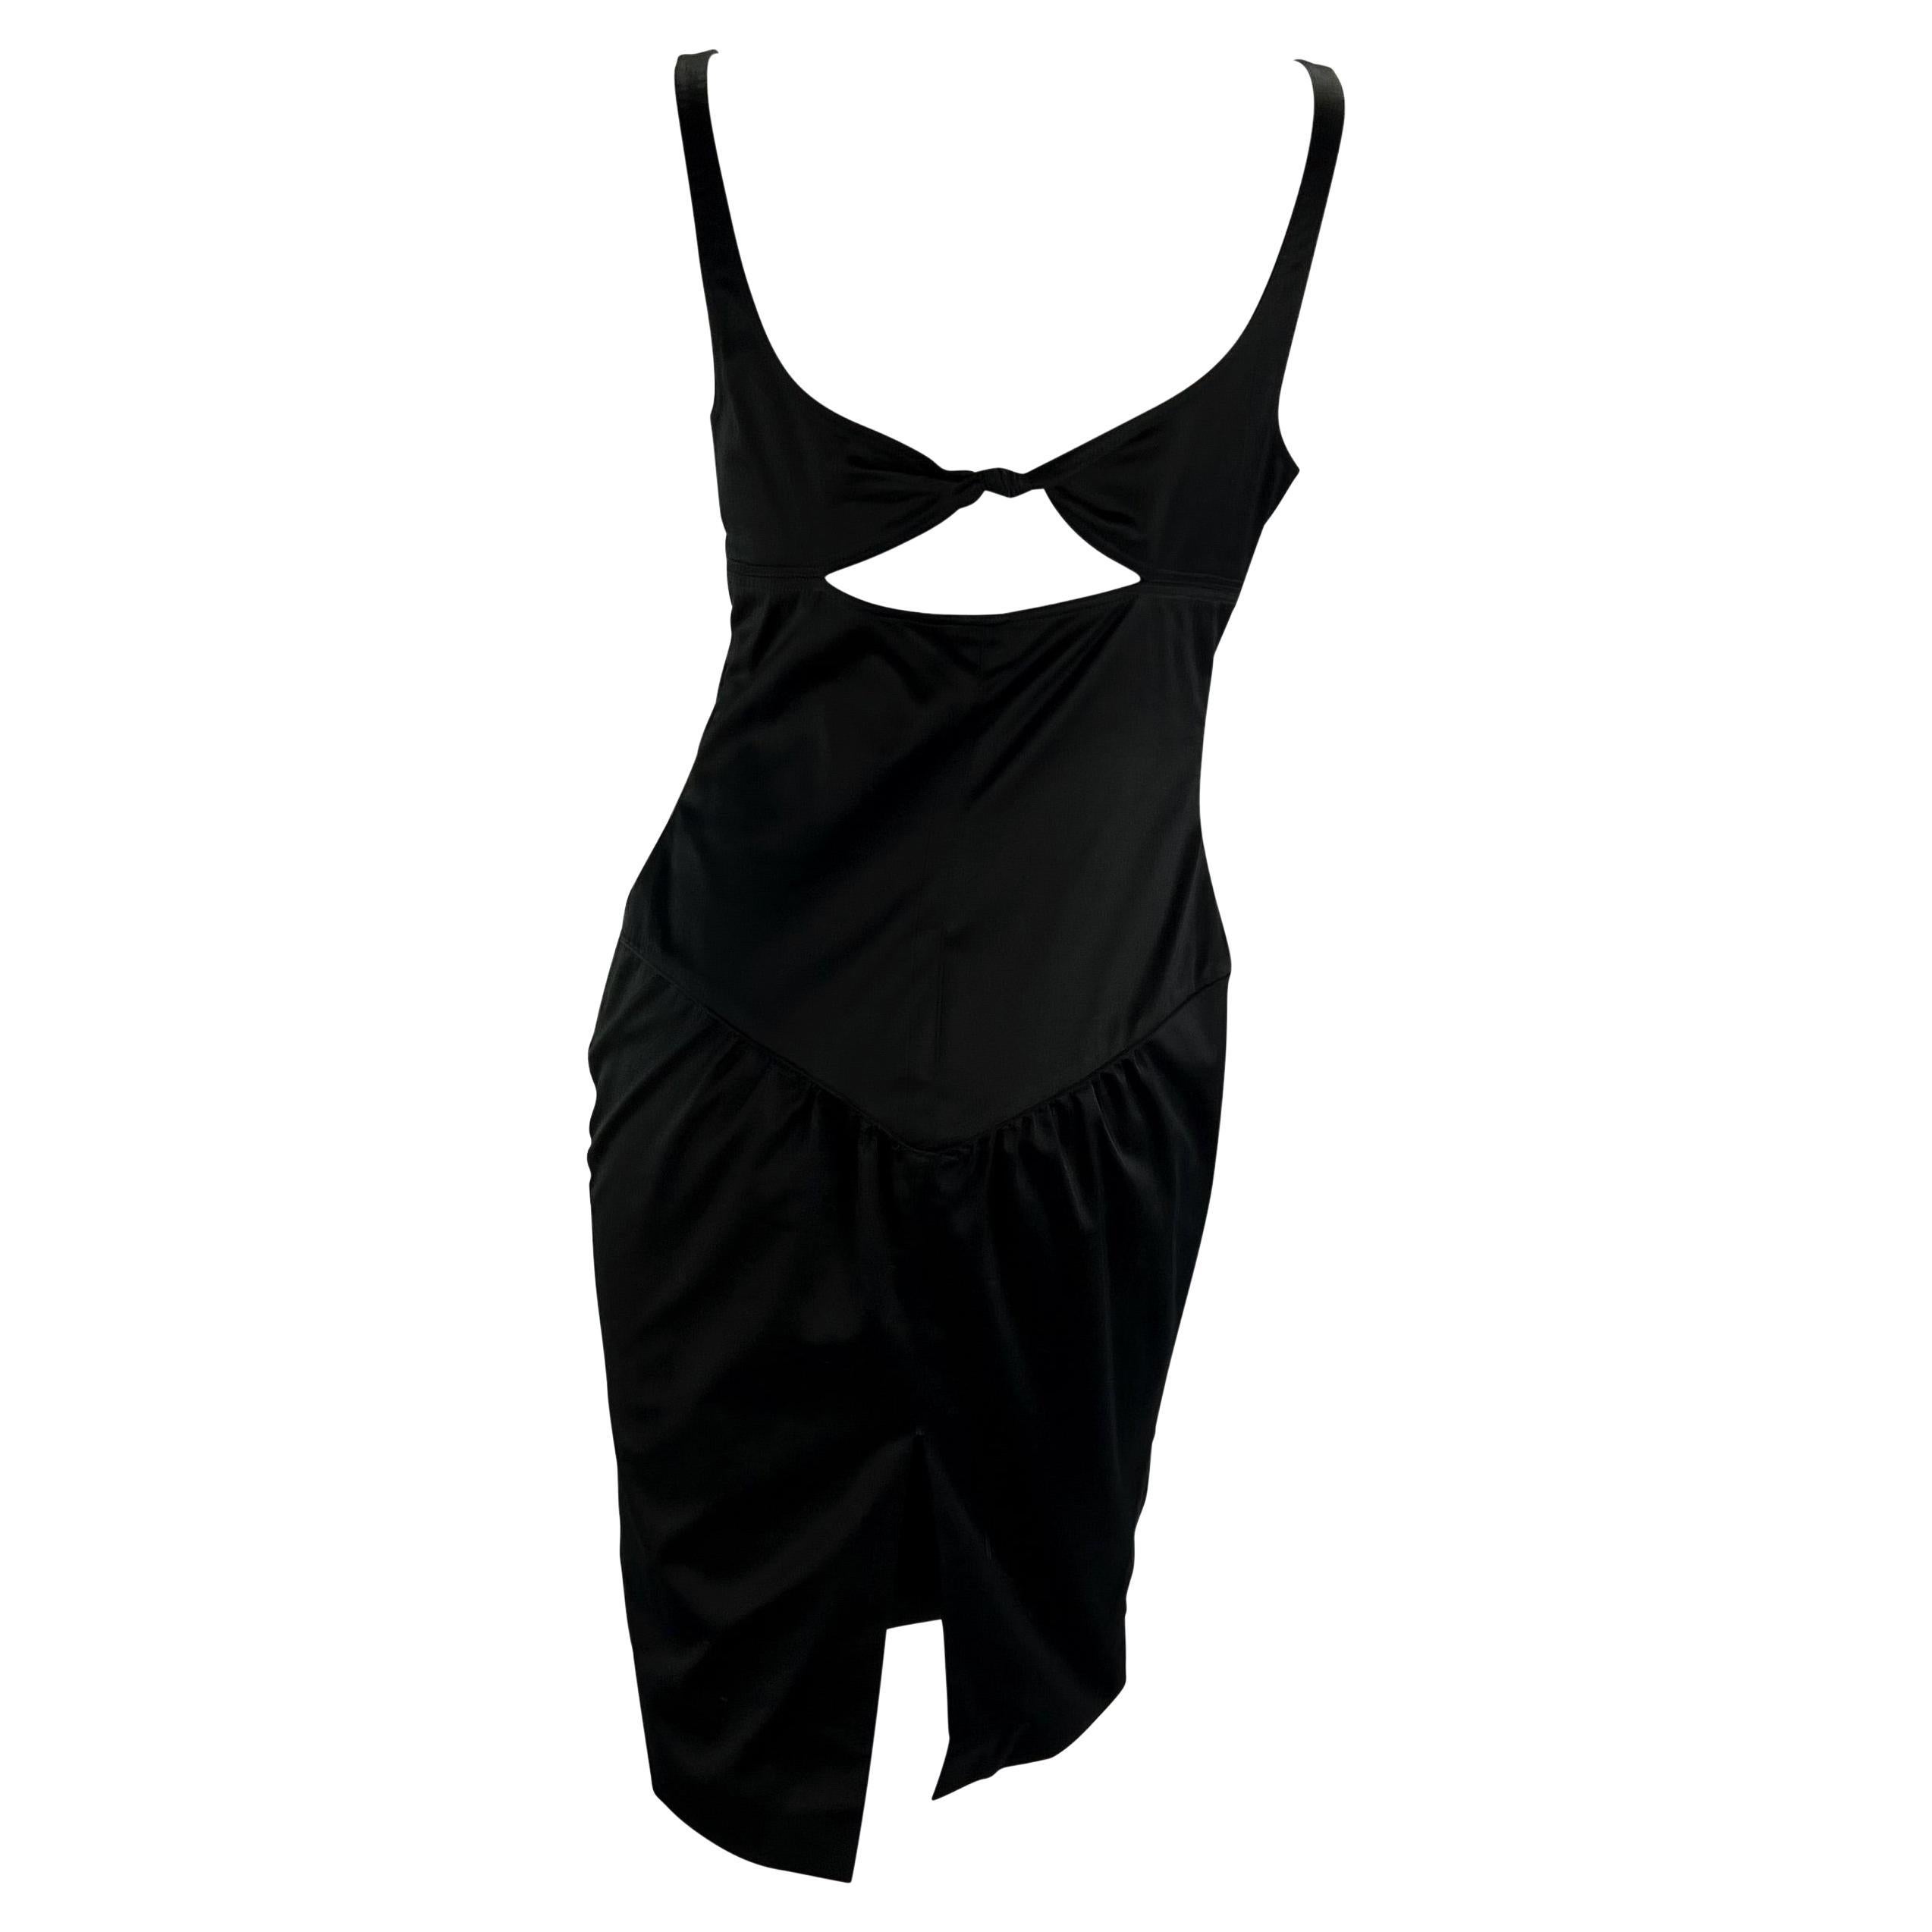 TheRealList presents: a beautiful black Gucci cutout dress, designed by Tom Ford. From the 2003 collection, this little black dress is constructed entirely of a silk blend and features a semi-sweetheart neckline, a cut out at the mid-back, and a